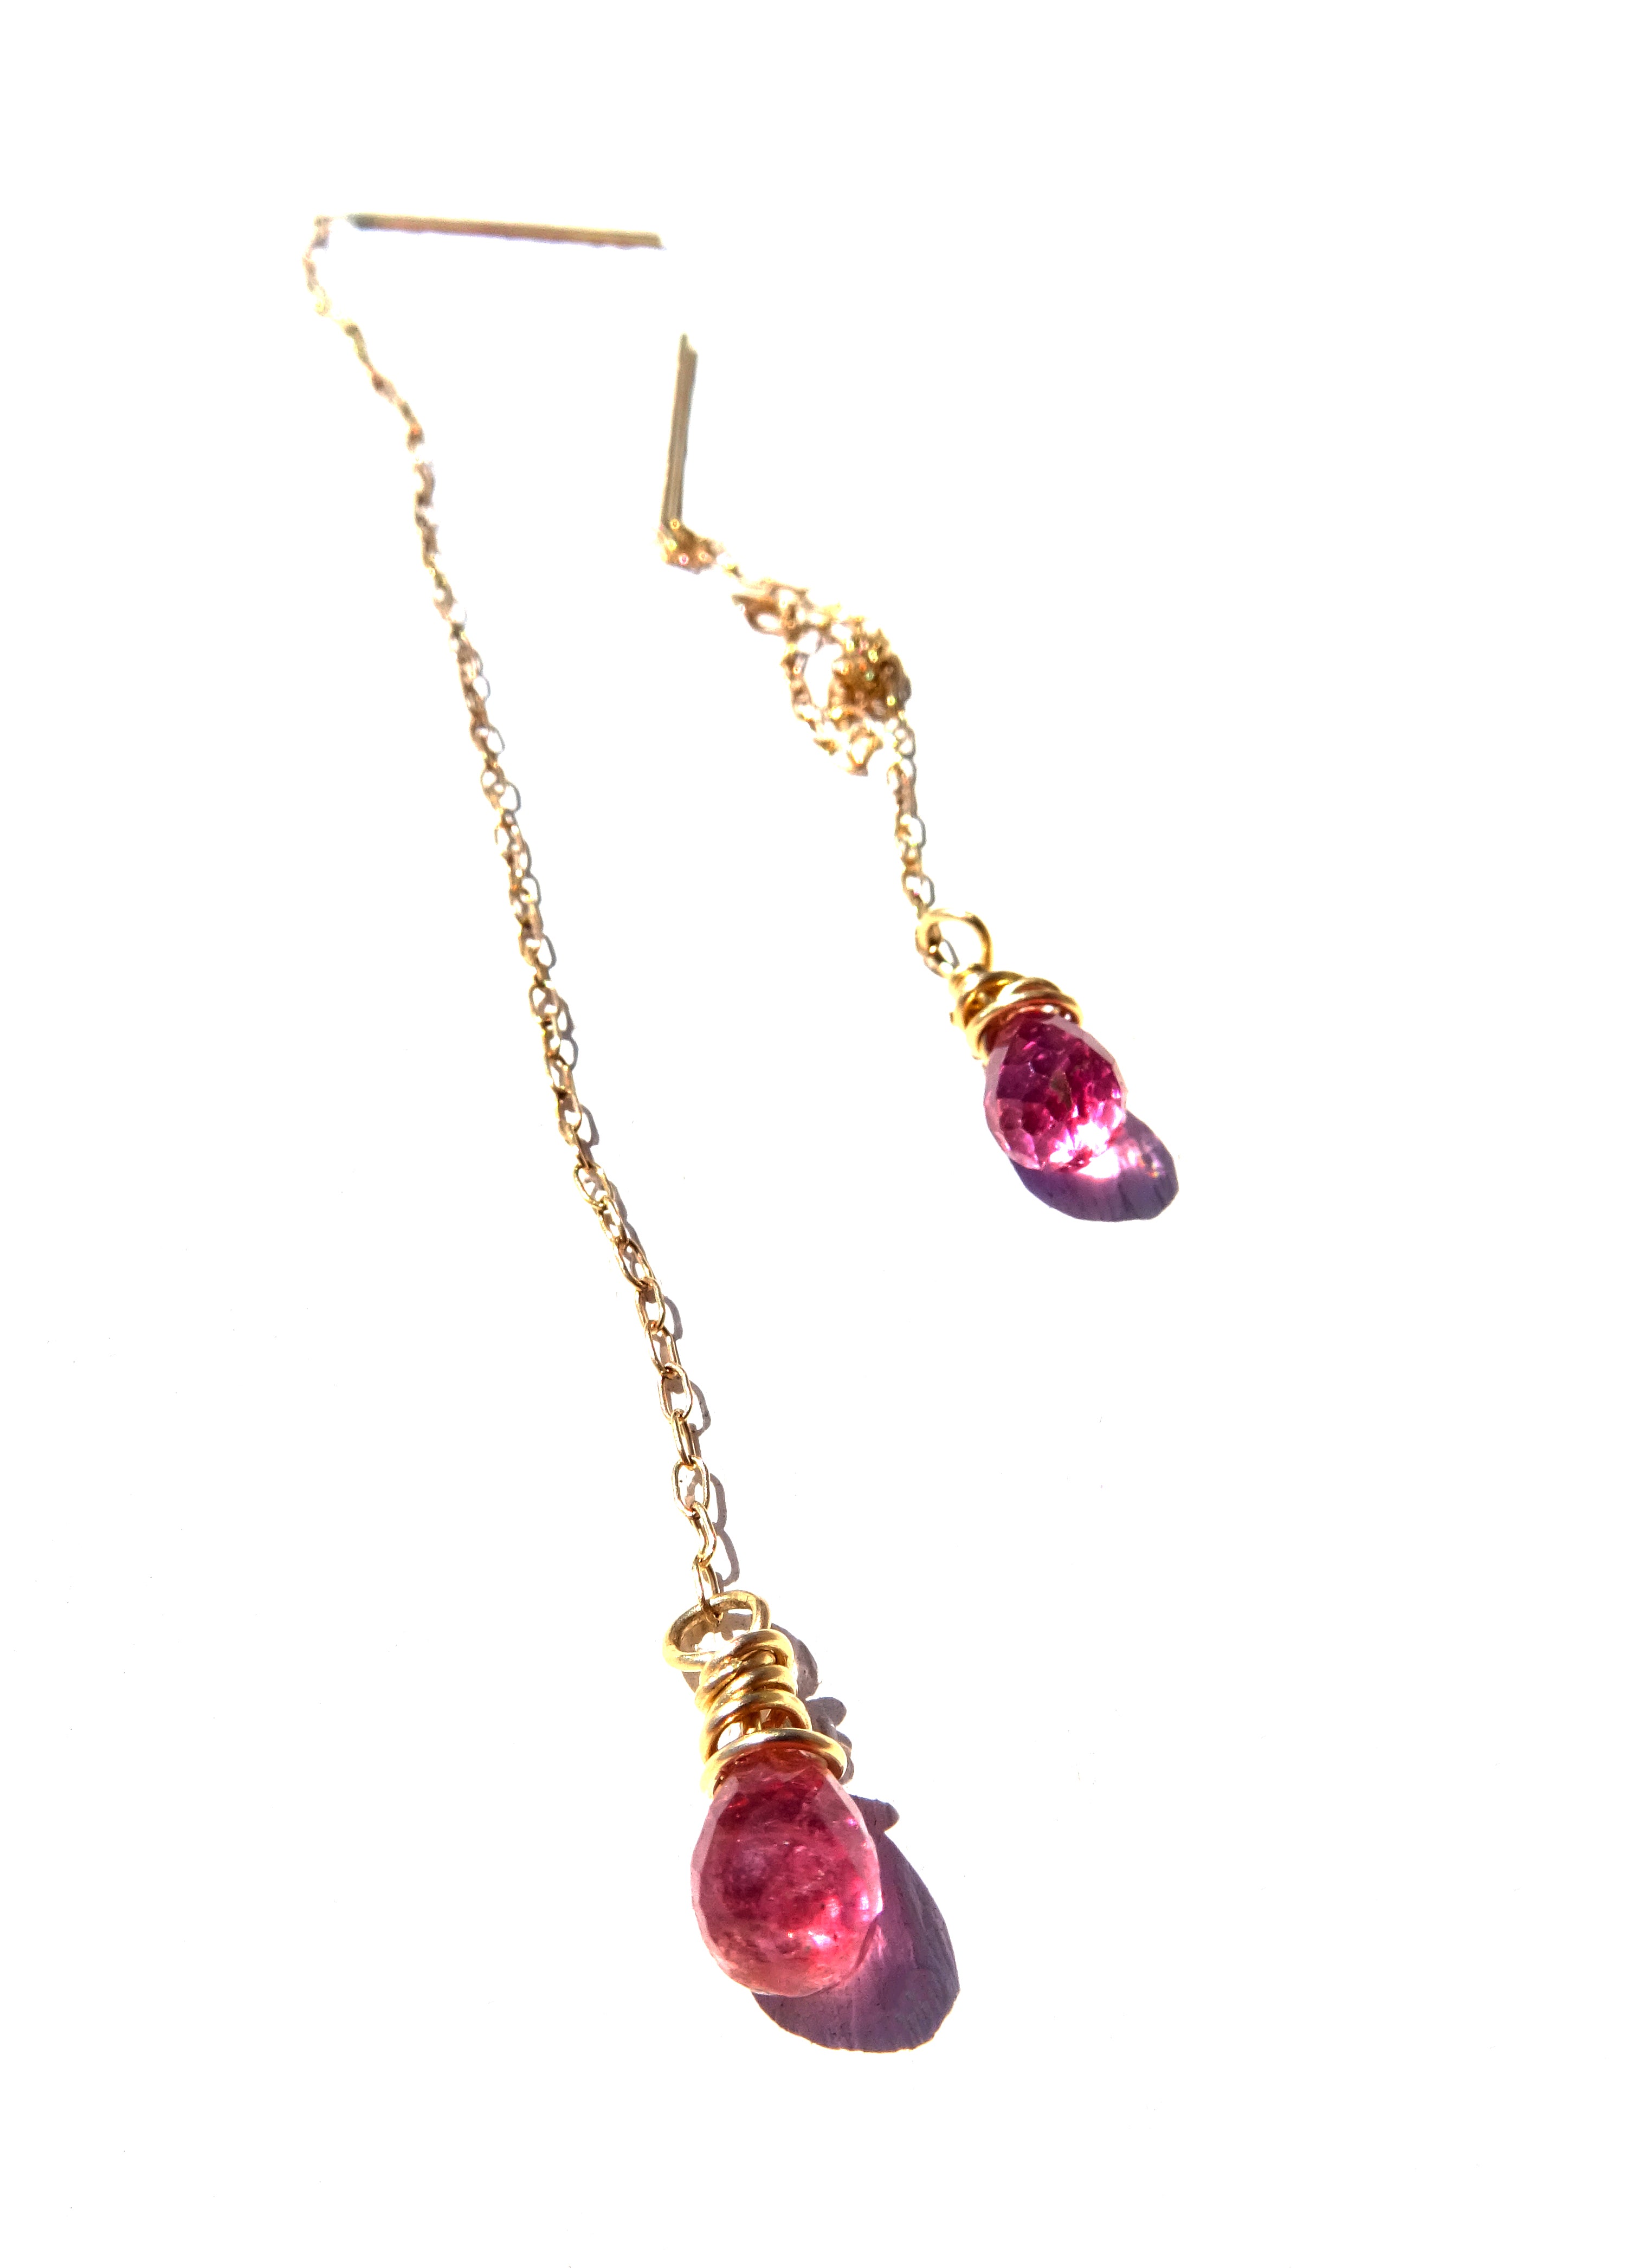 Gold filled earring with pink Tourmaline drop